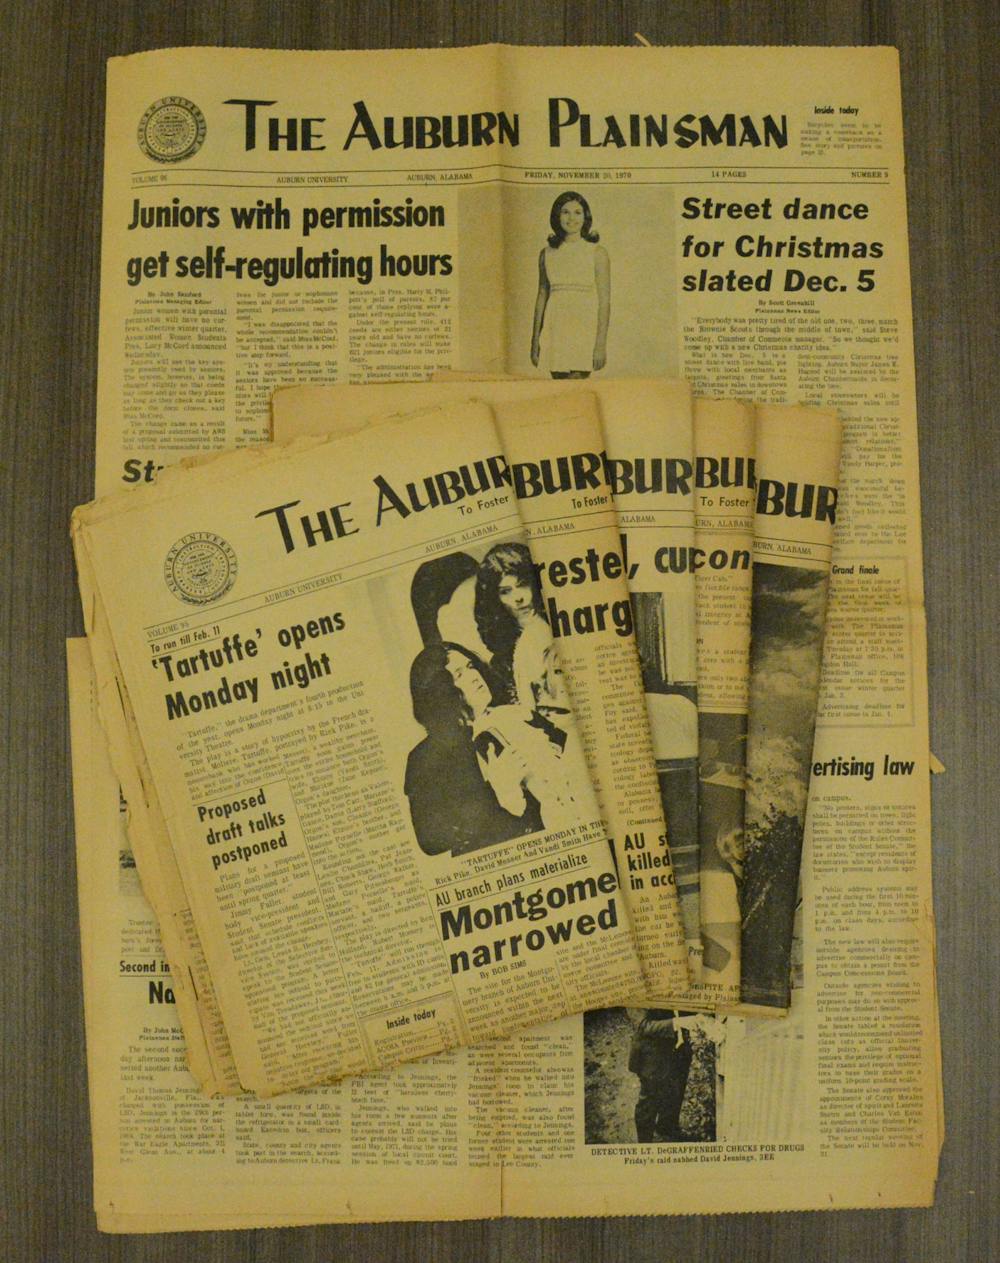 Some editions of The Auburn Plainsman from the 1960s